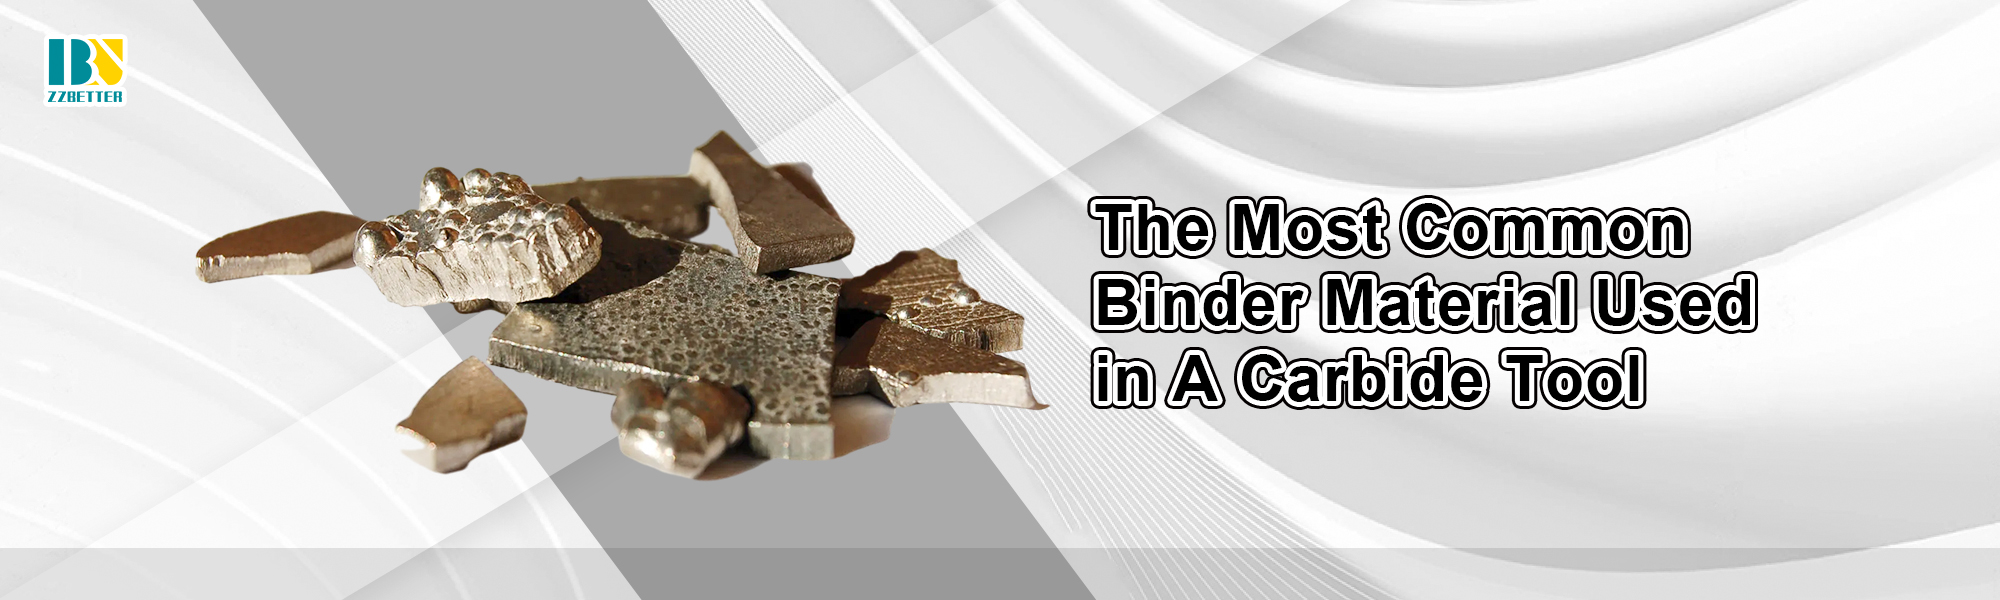 The Most Common Binder Material Used in A Carbide Tool